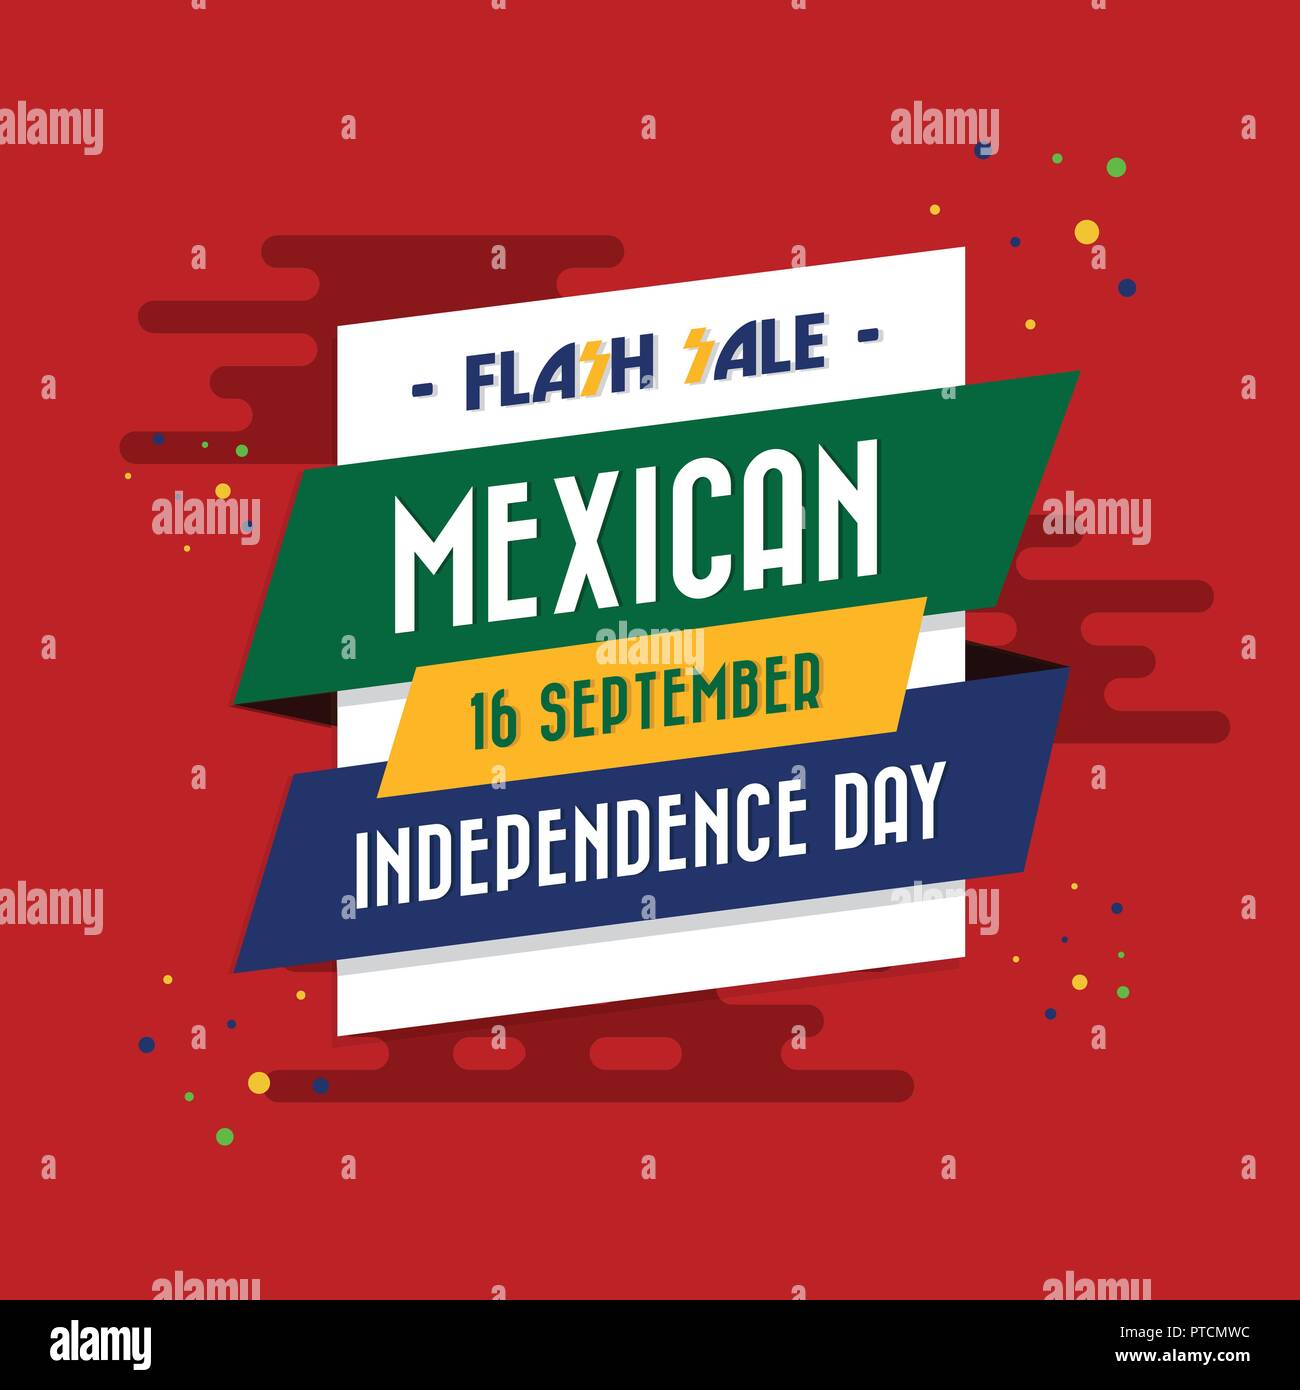 The Independence Day of Mexico poster & banner design vector illustration Stock Vector